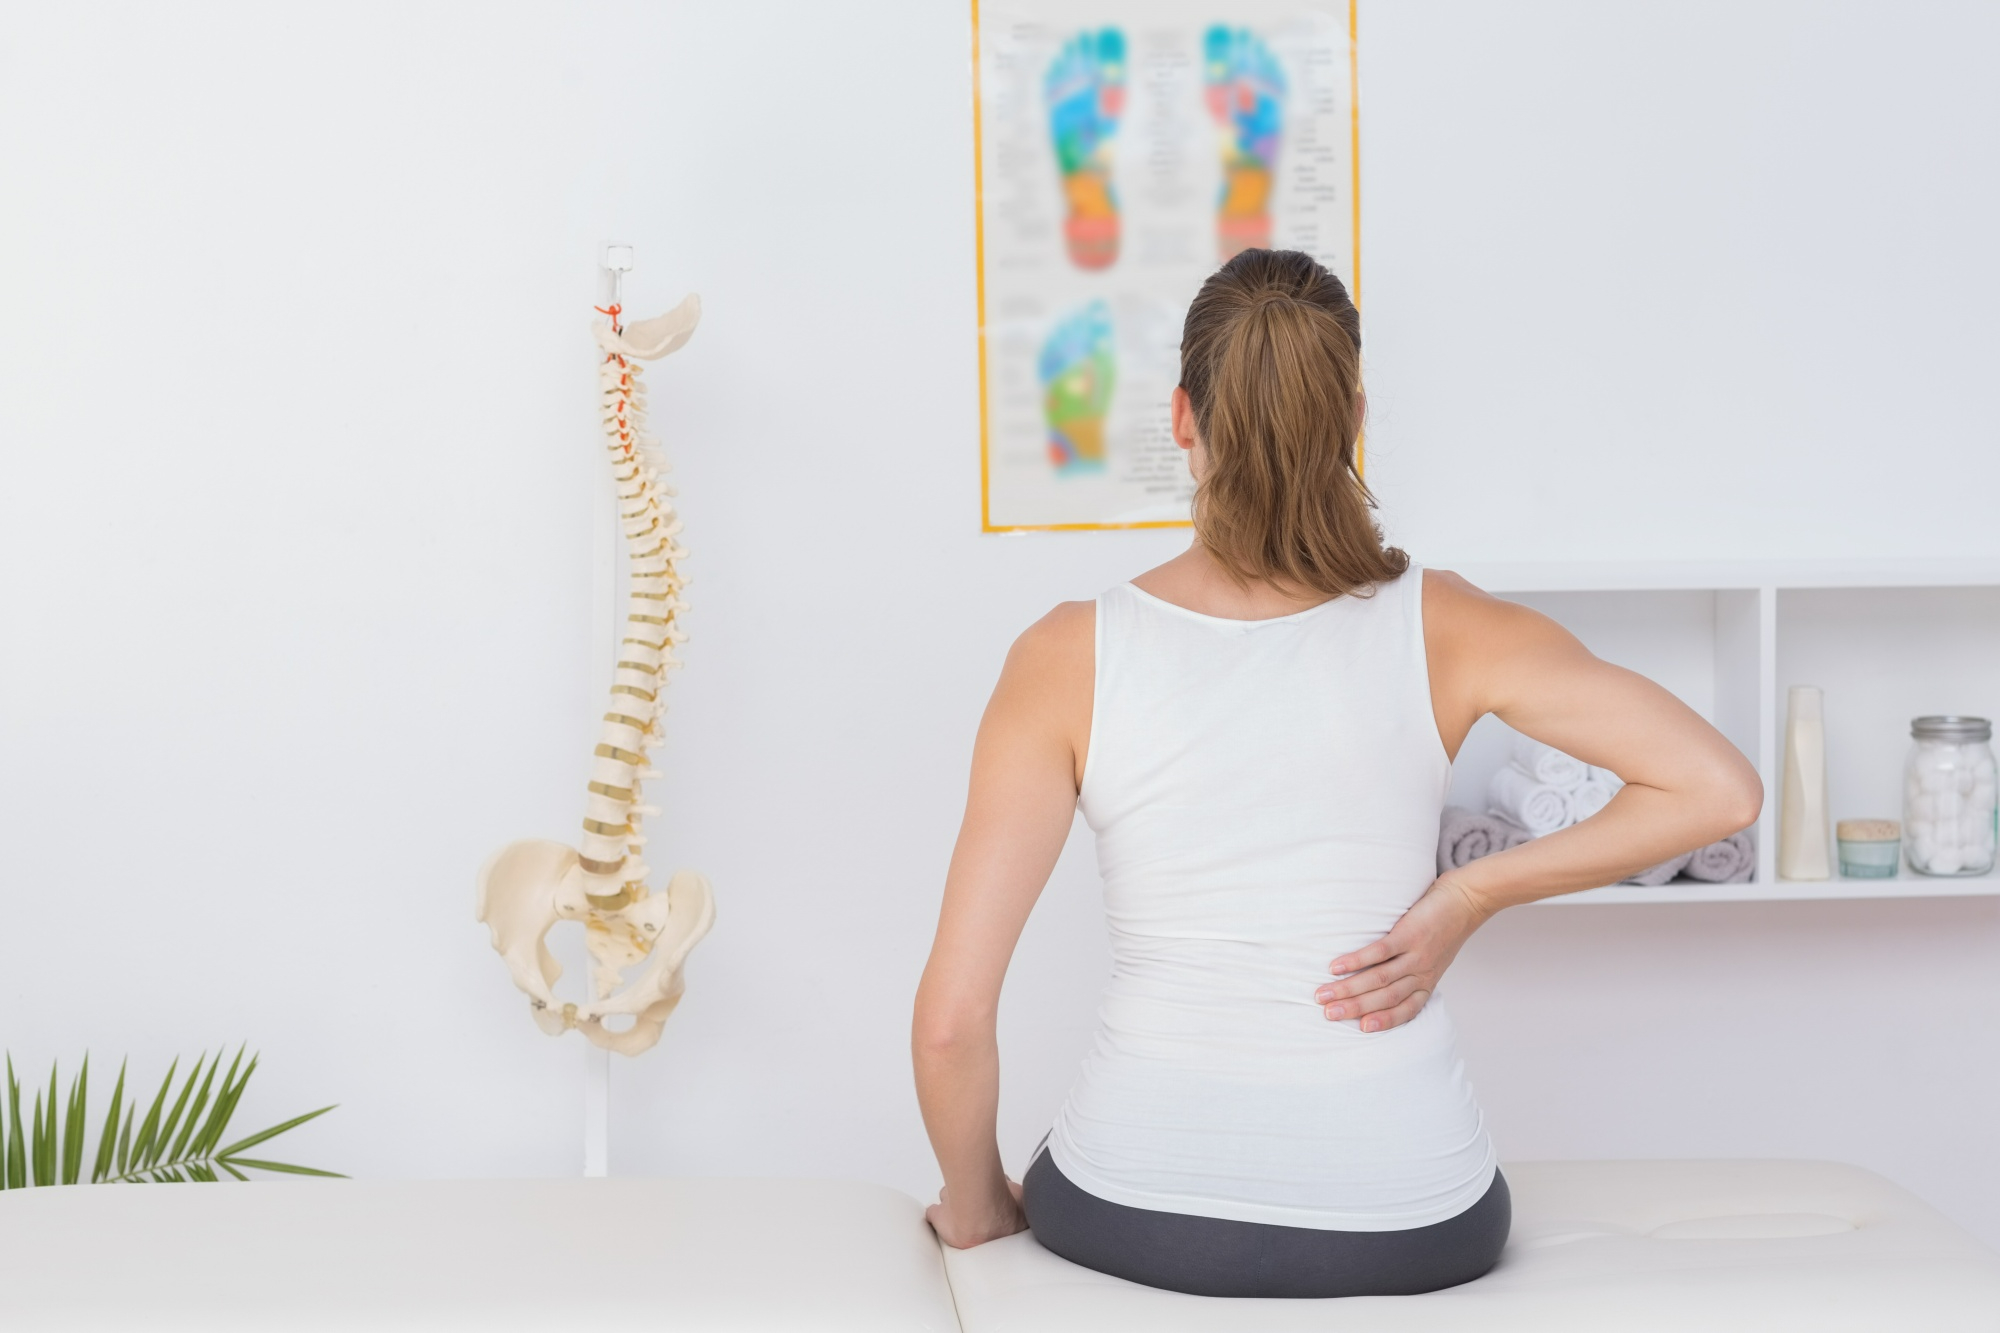 scoliosis of the Spine treatment